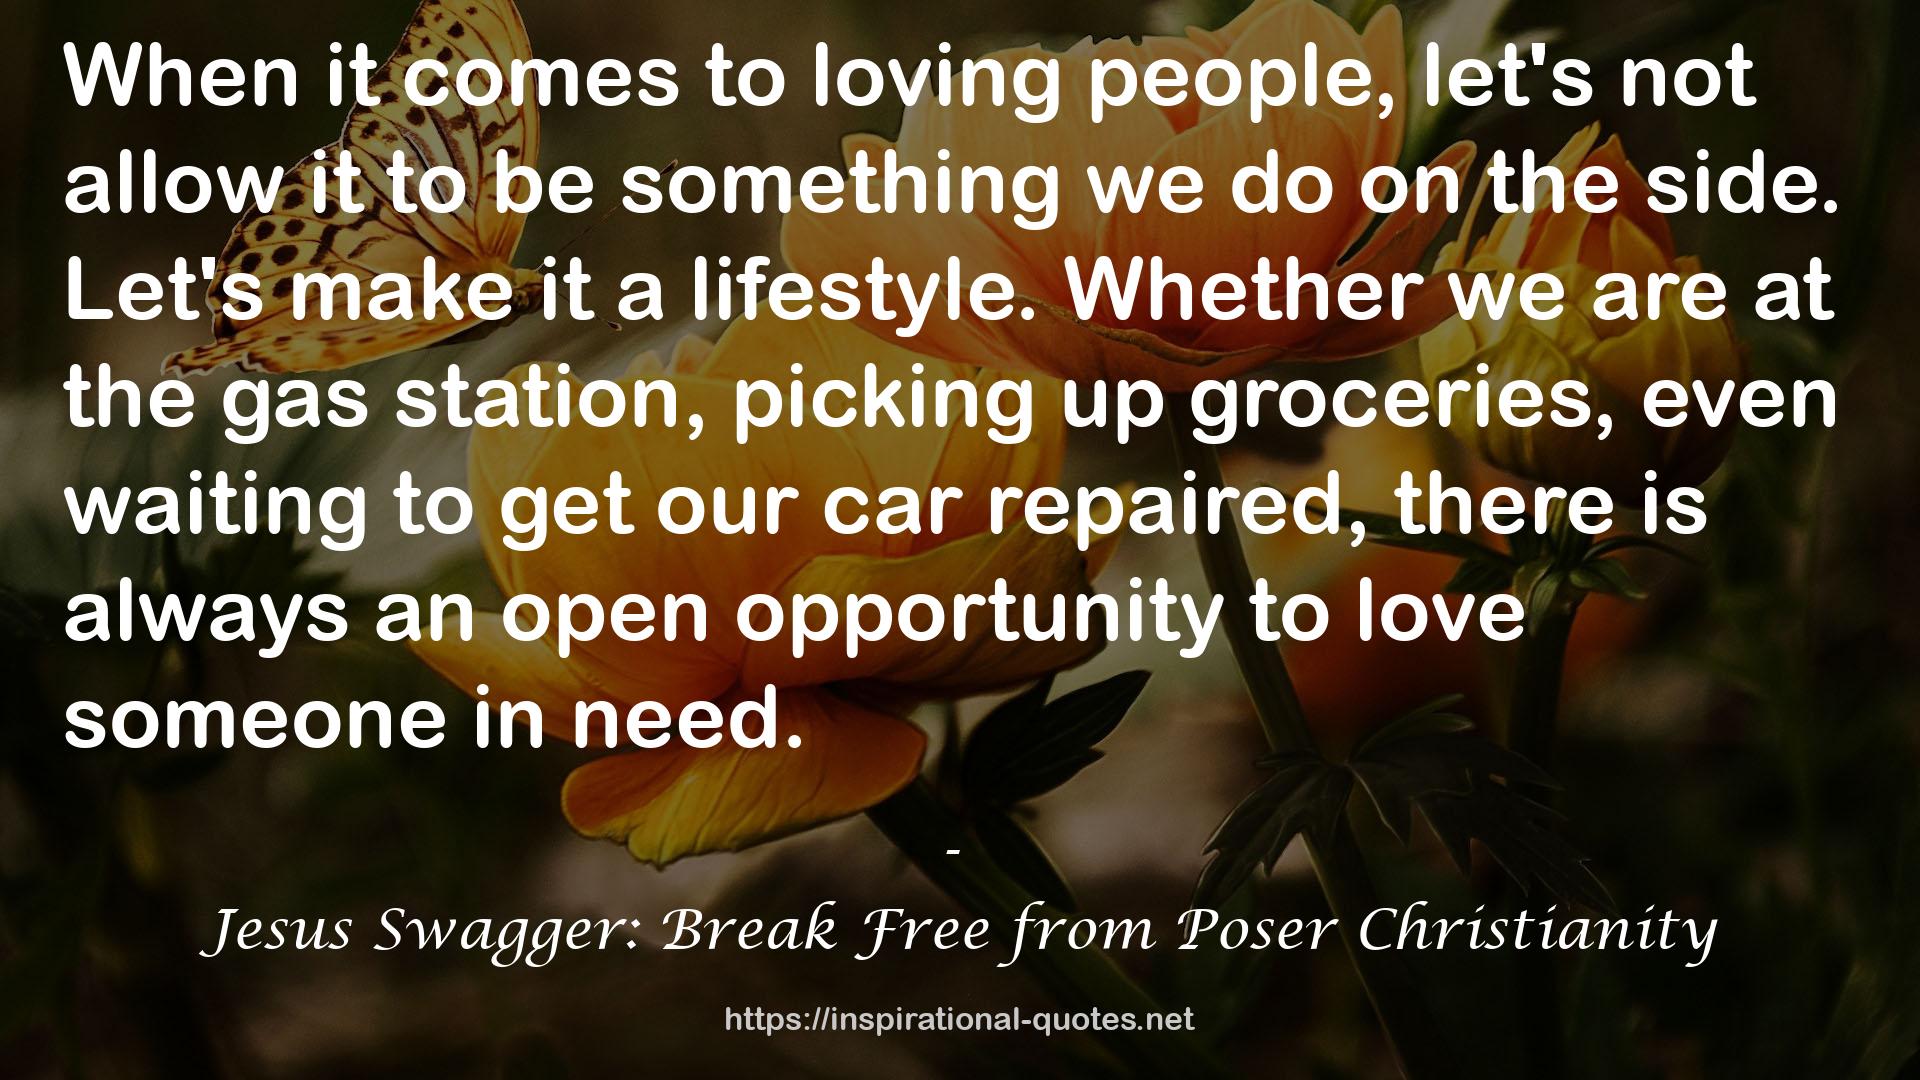 Jesus Swagger: Break Free from Poser Christianity QUOTES